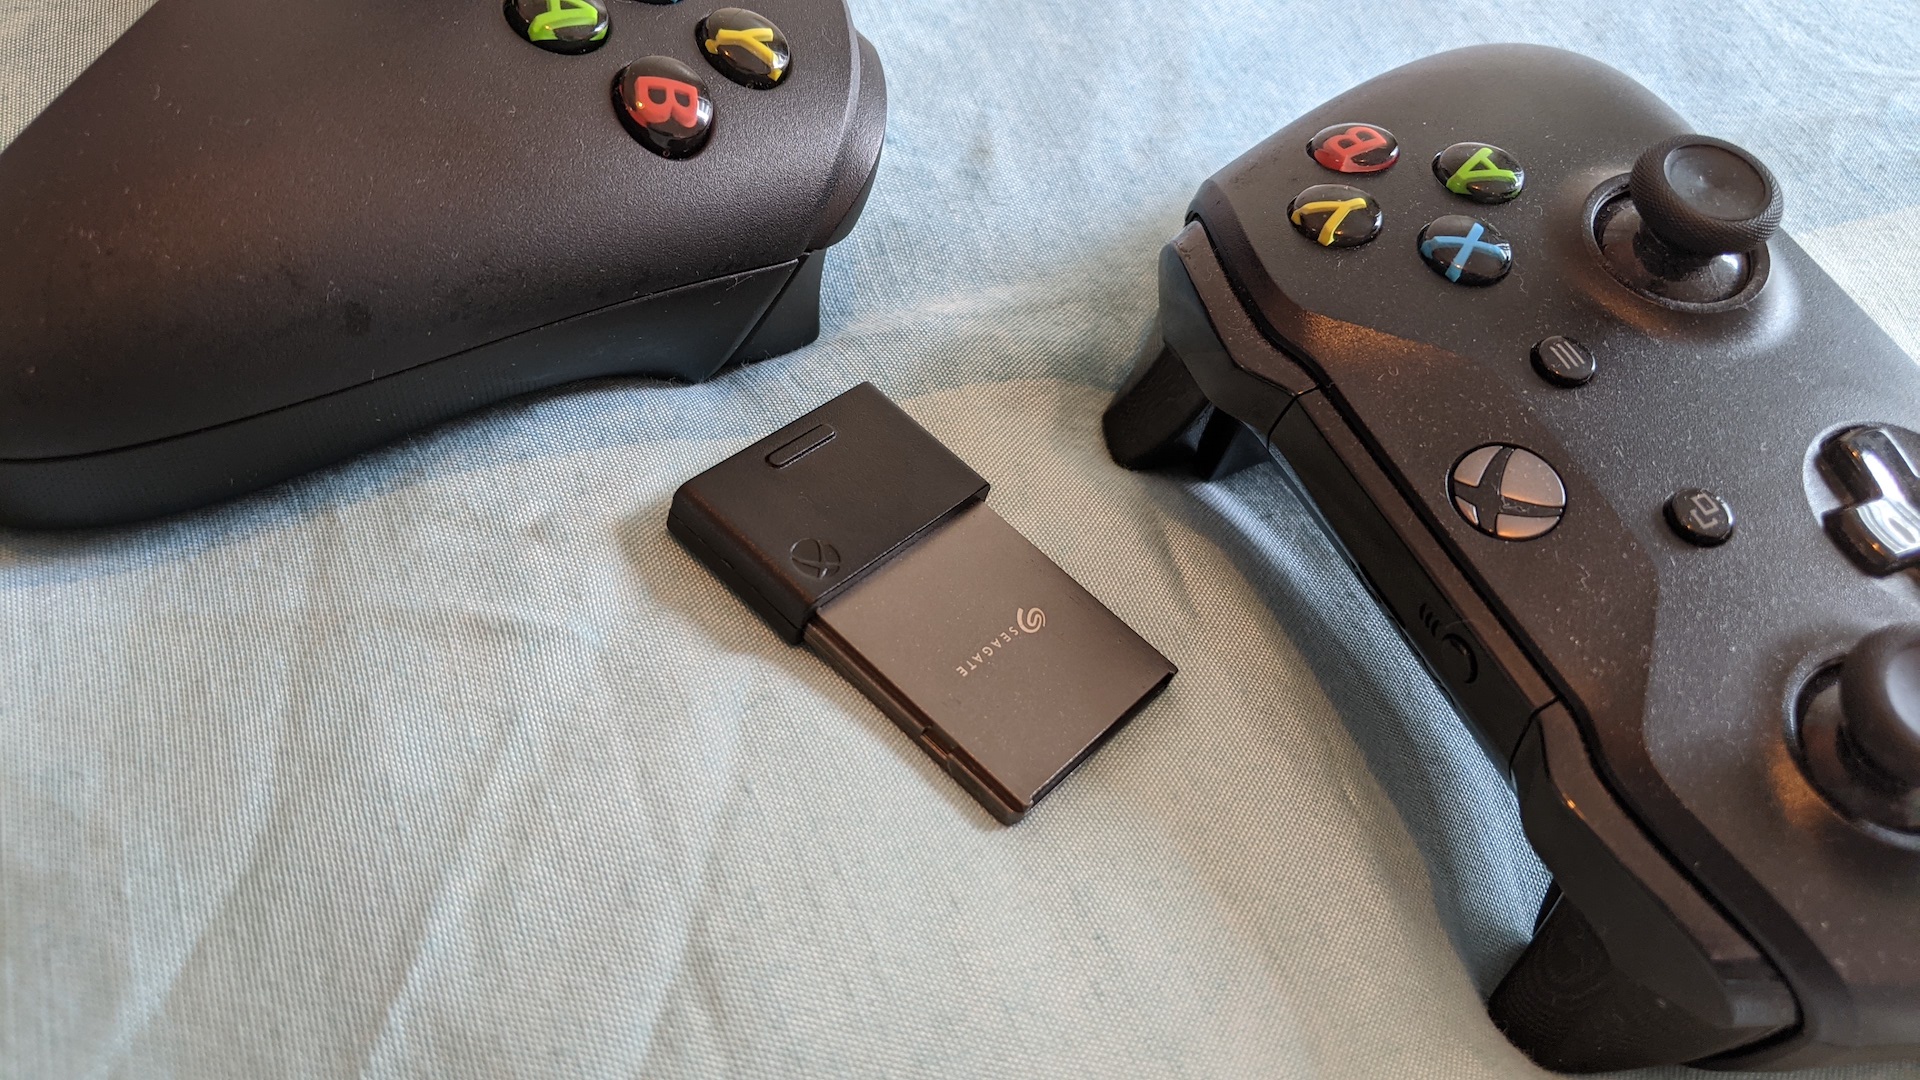 How to expand Xbox Series X & Series S storage with an external drive